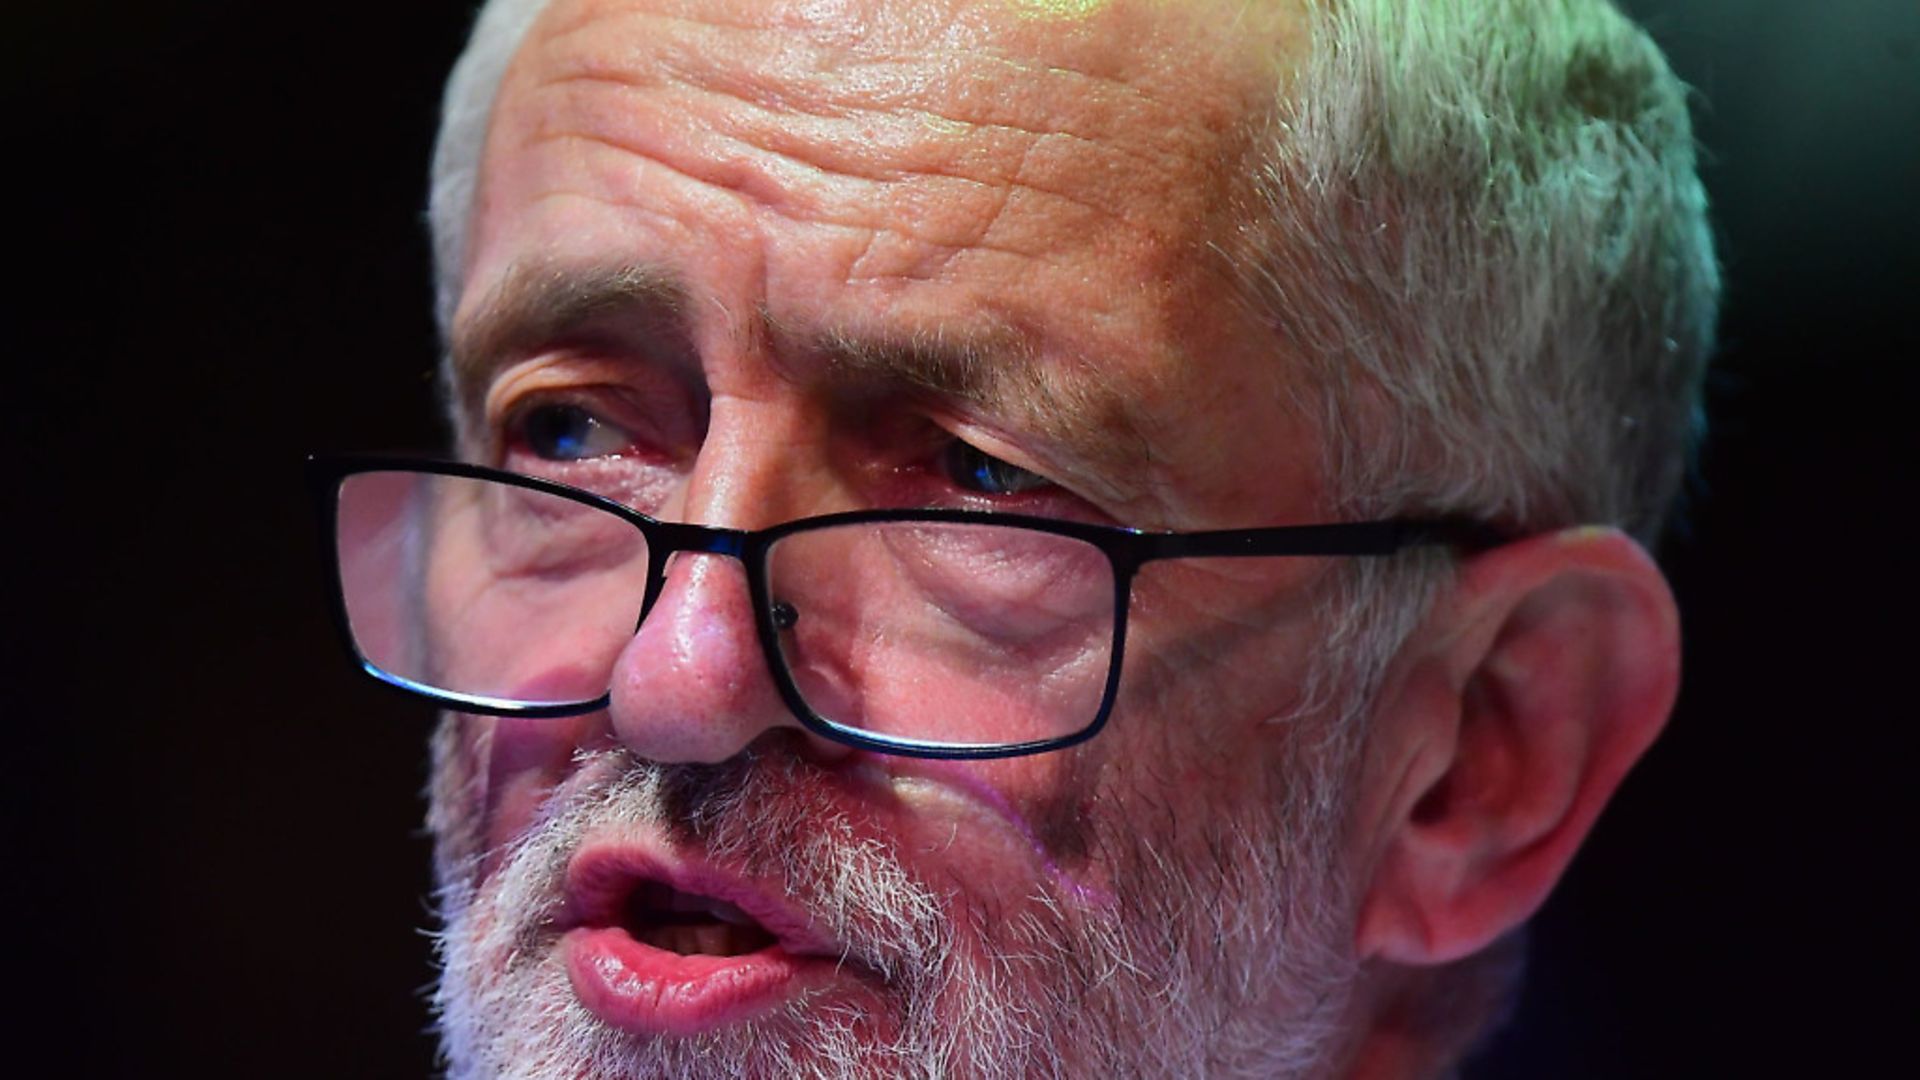 Leader of the Labour party Jeremy Corbyn. Picture: Victoria Jones/PA Wire/PA Images - Credit: PA Wire/PA Images